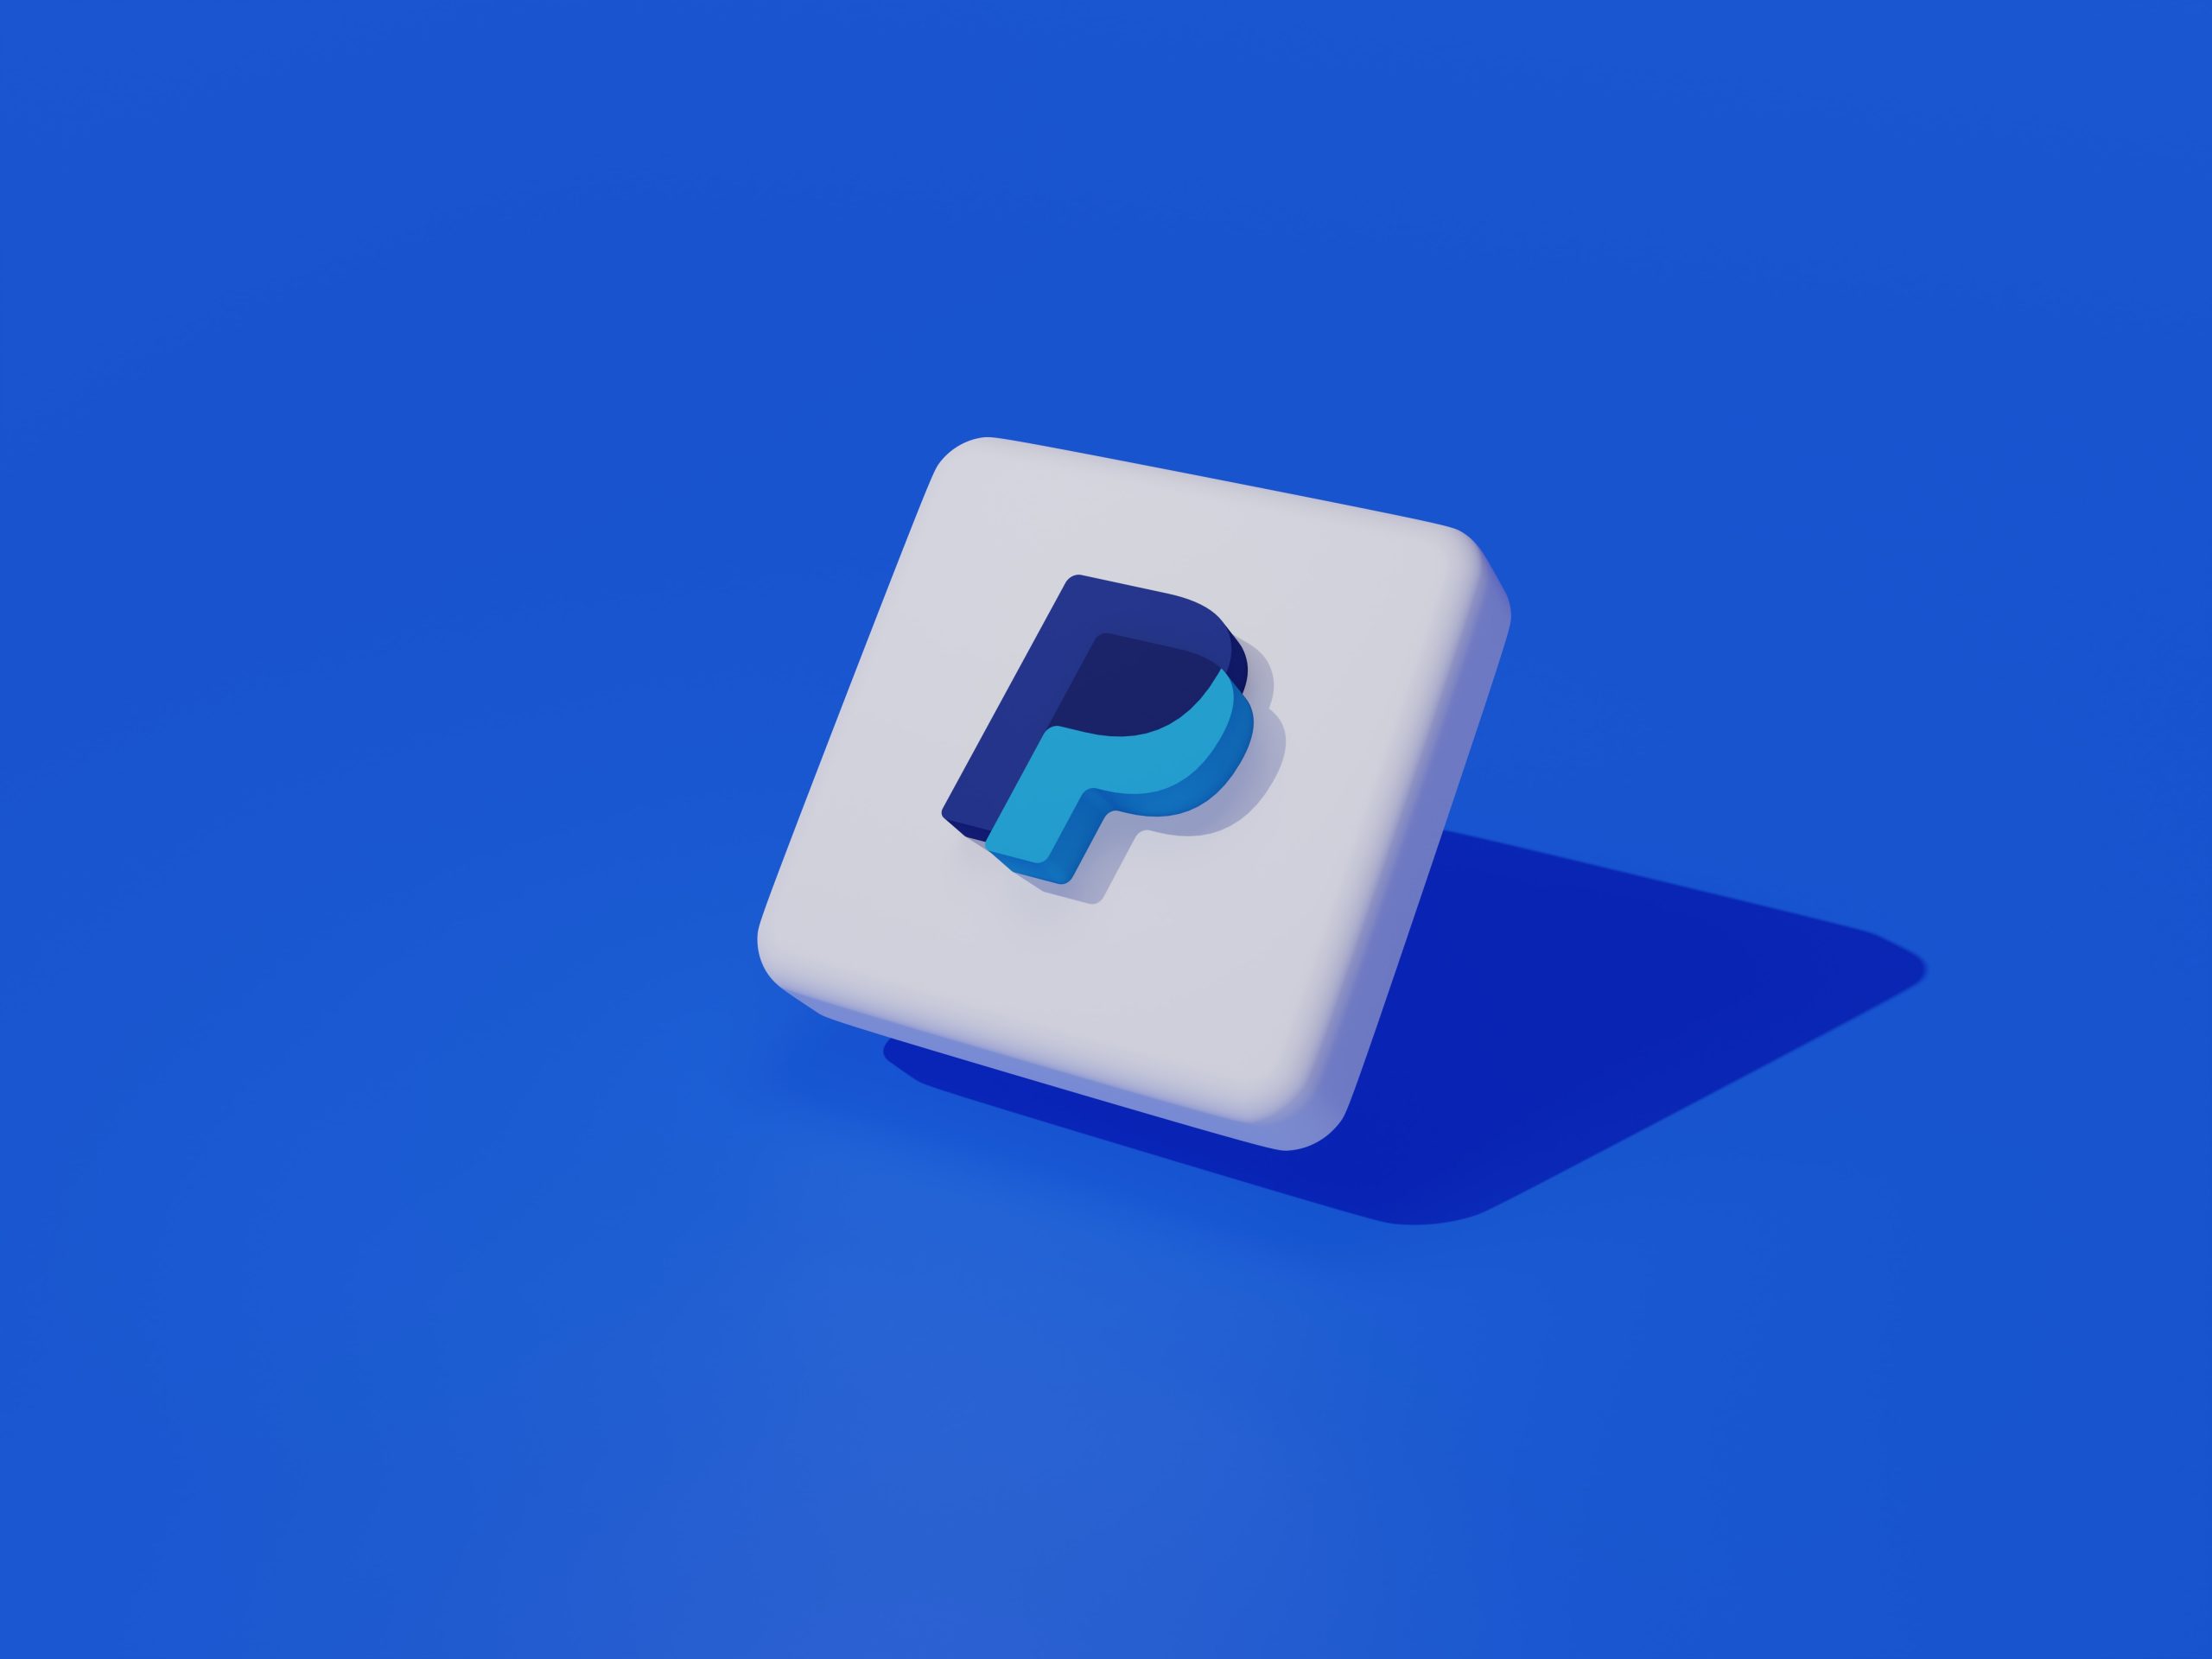 PayPal Launches U.S. Dollar Stablecoin